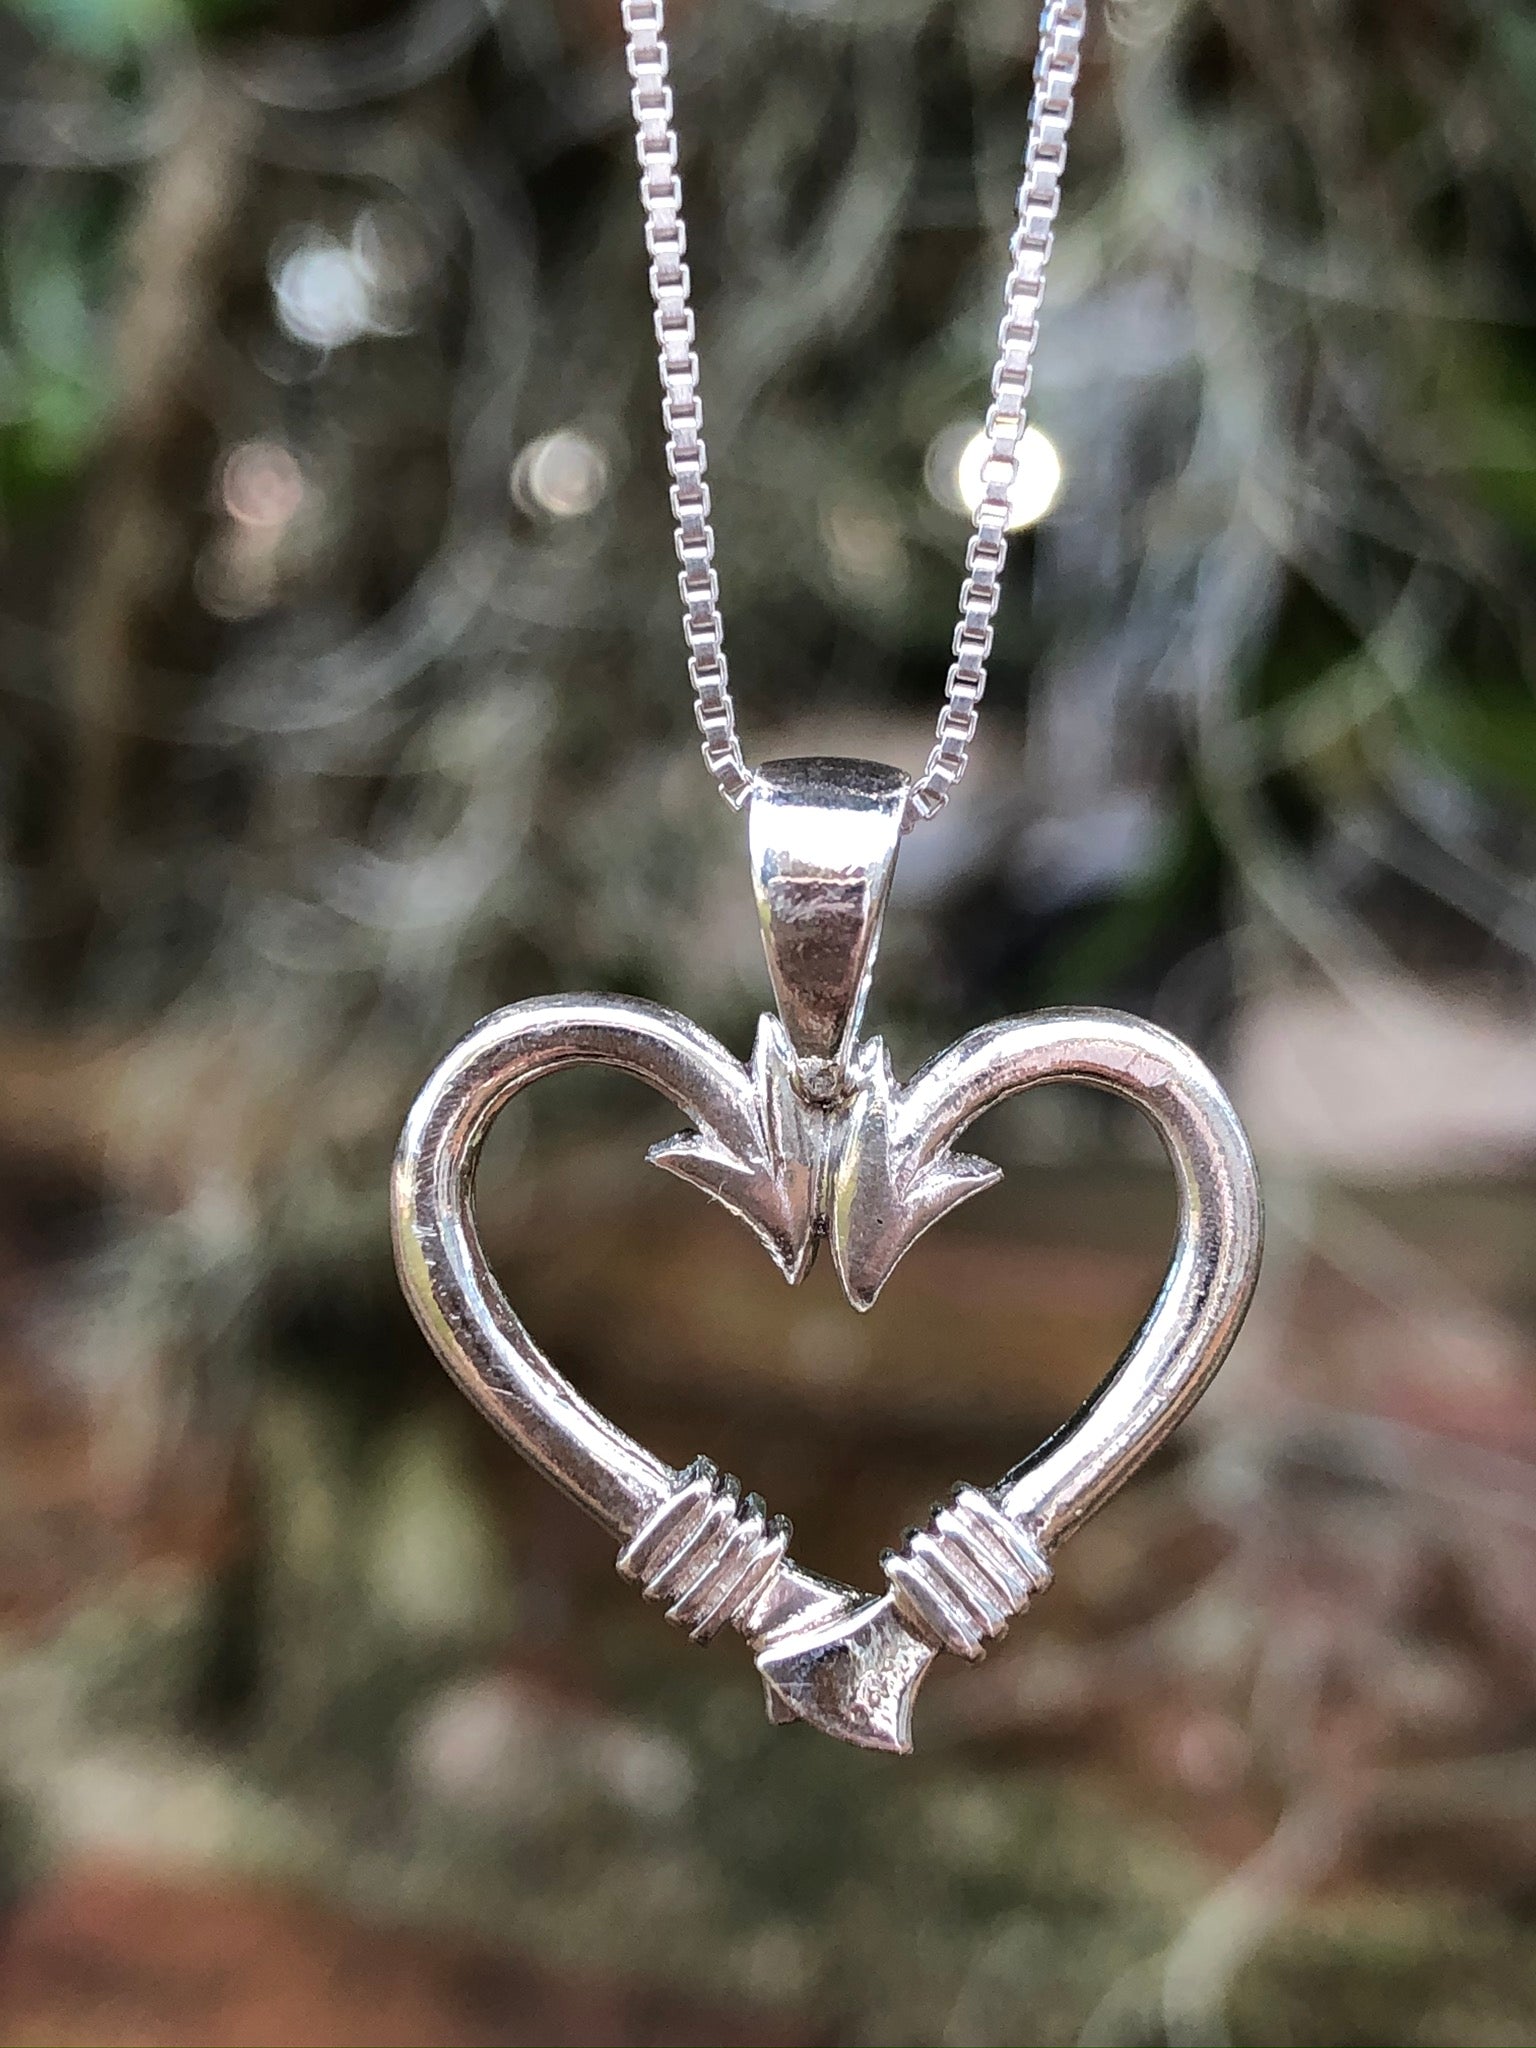 Minimalist Anglers Heart necklace